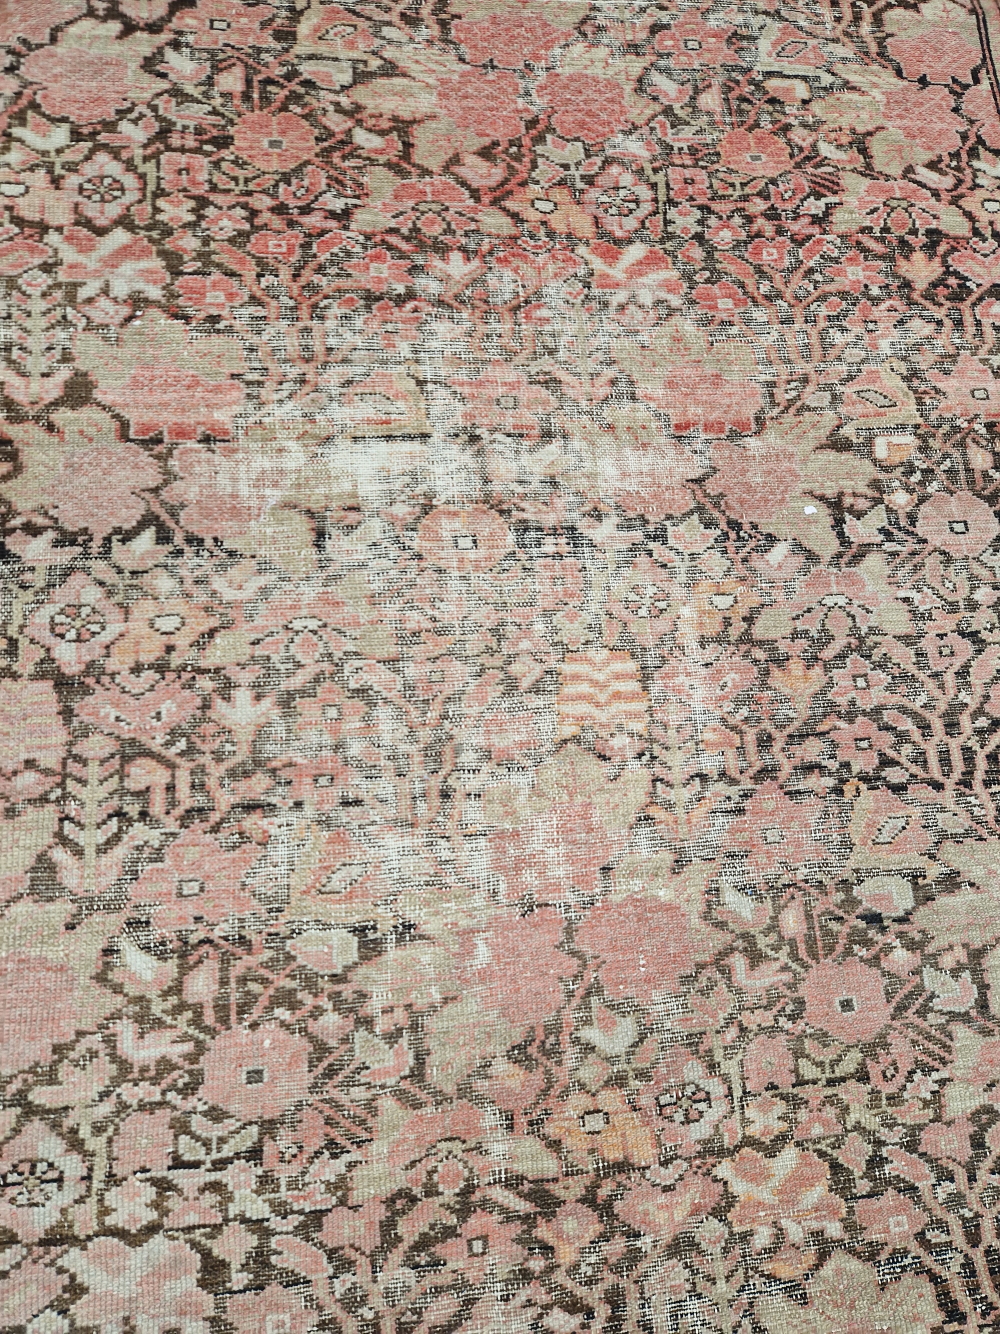 AN ANTIQUE PERSIAN MALAYER RUG 200 x 130 cm. - Image 8 of 10